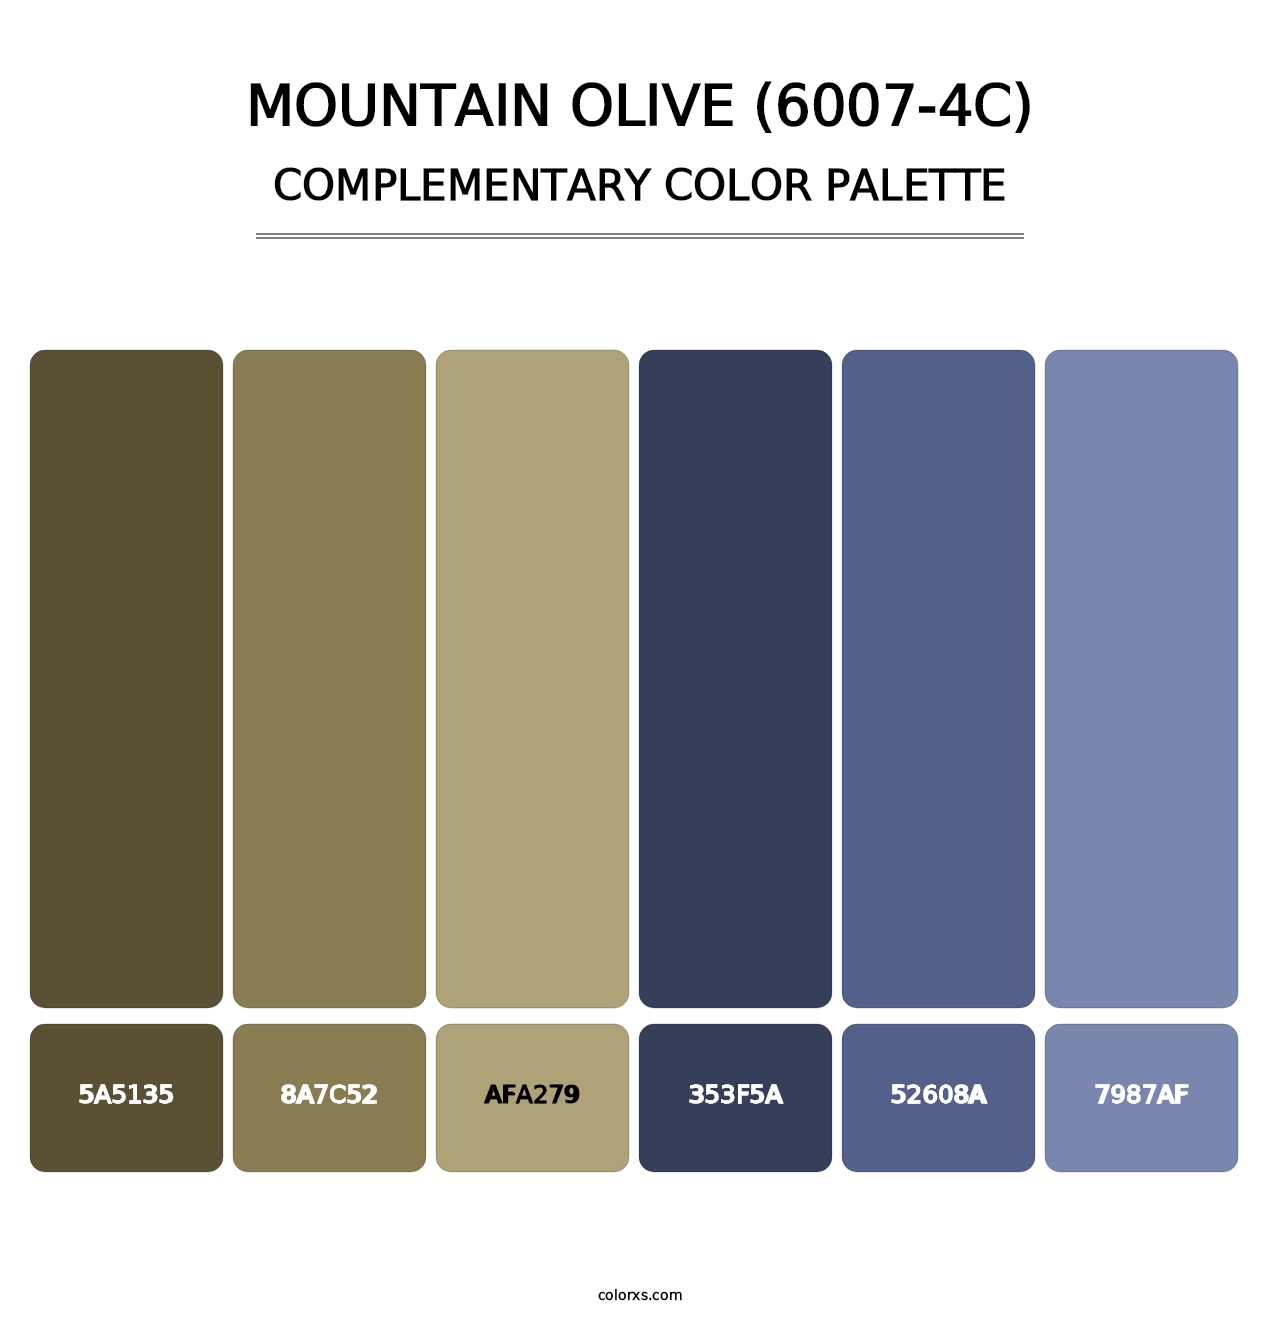 Mountain Olive (6007-4C) - Complementary Color Palette